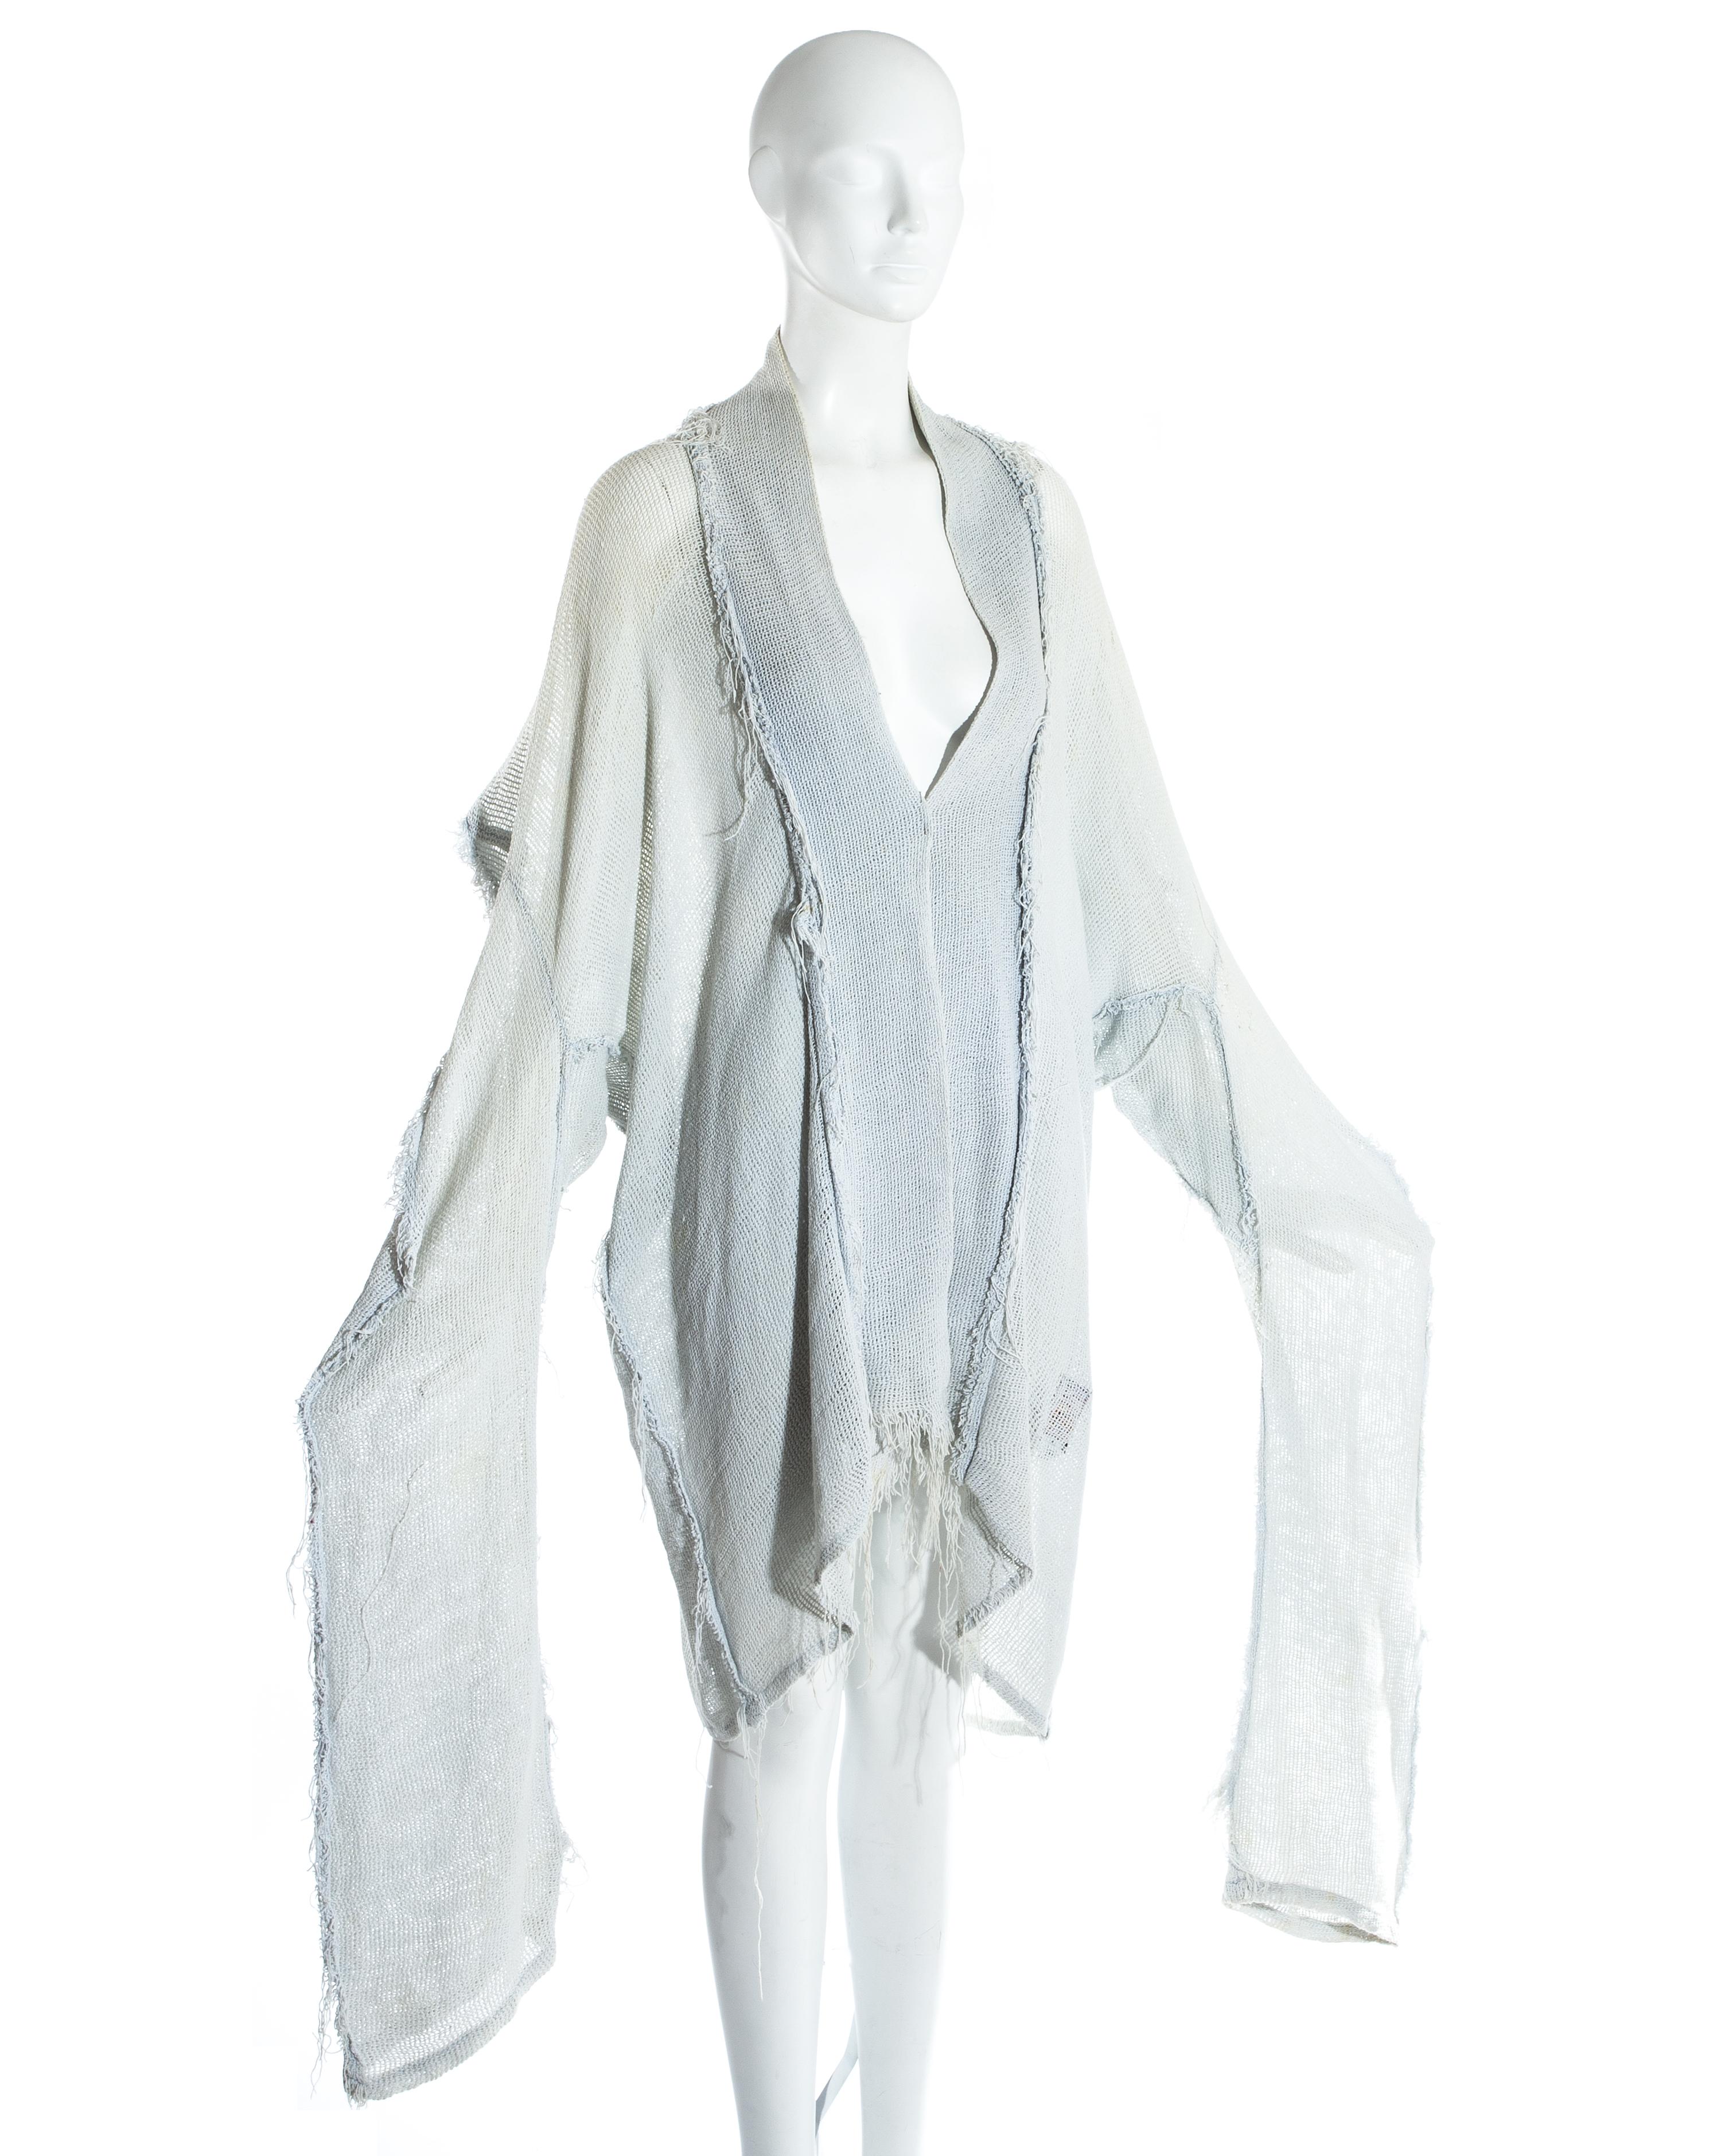 Worlds End by Vivienne Westwood and Malcolm McLaren; Oversized dove grey cotton gauze jacket. Extra long sleeves, inverted frayed seams and square cut shoulders. Worn open with no closures.

'Punkature', Spring-Summer 1983